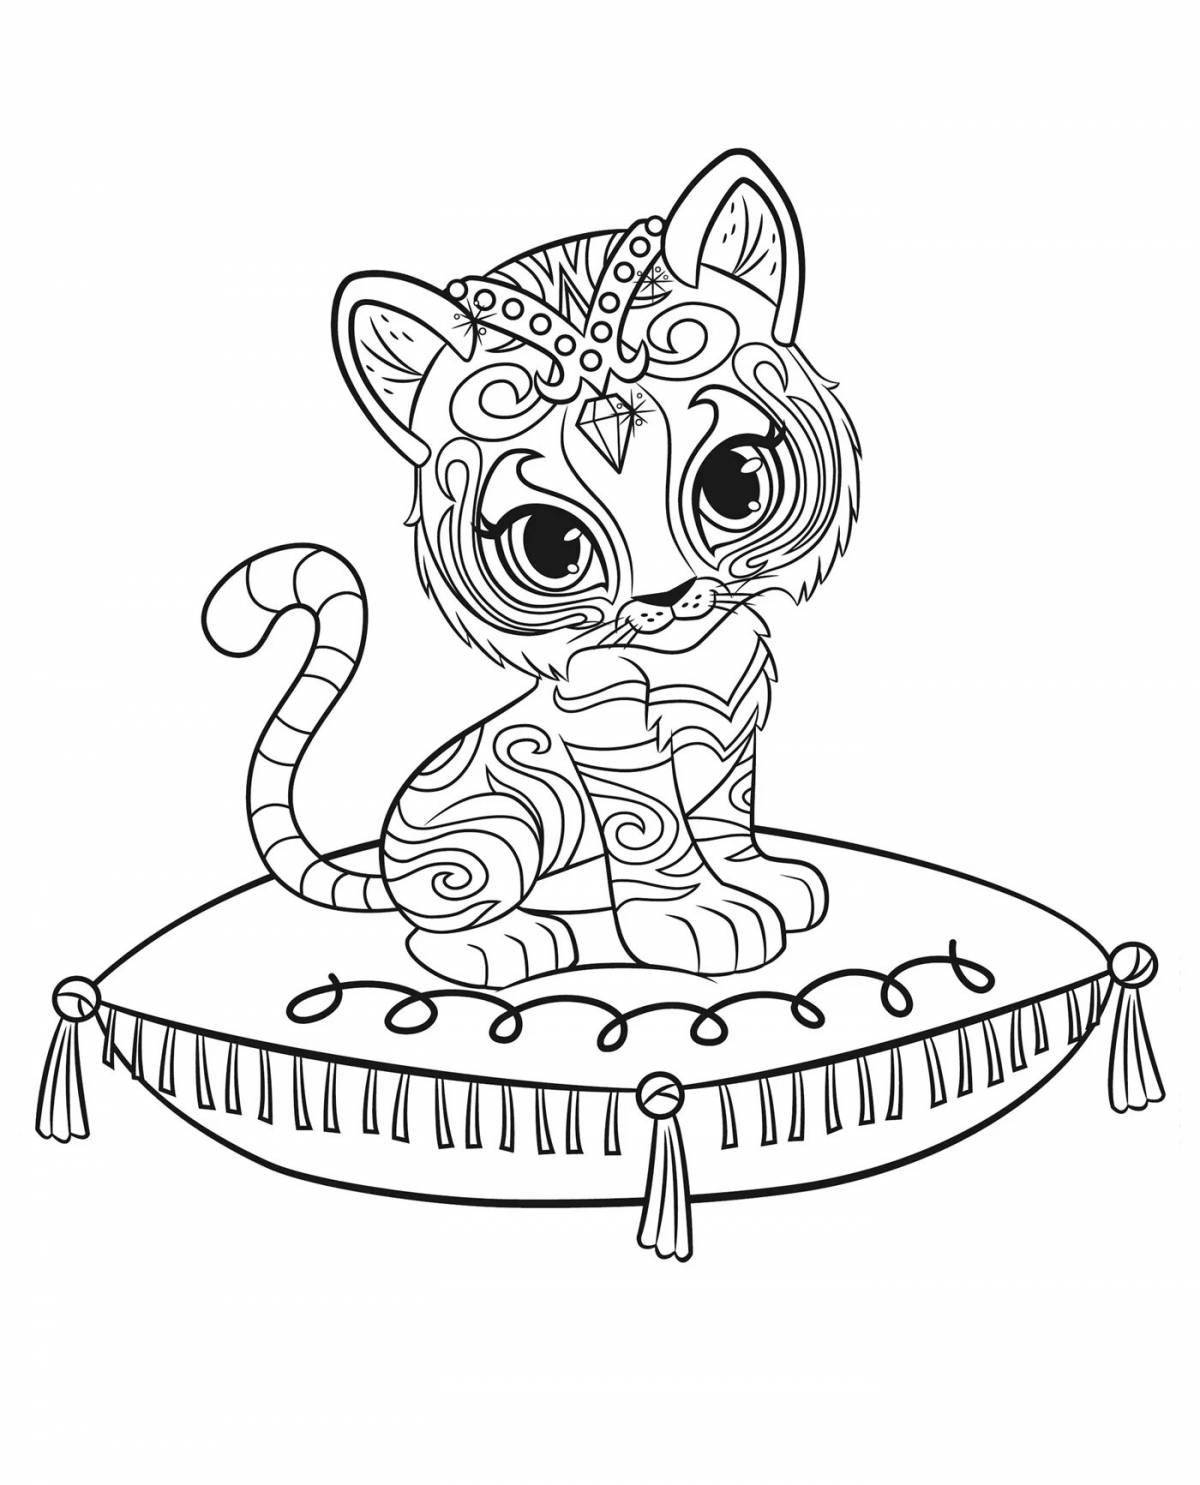 Tiger bright coloring for girls